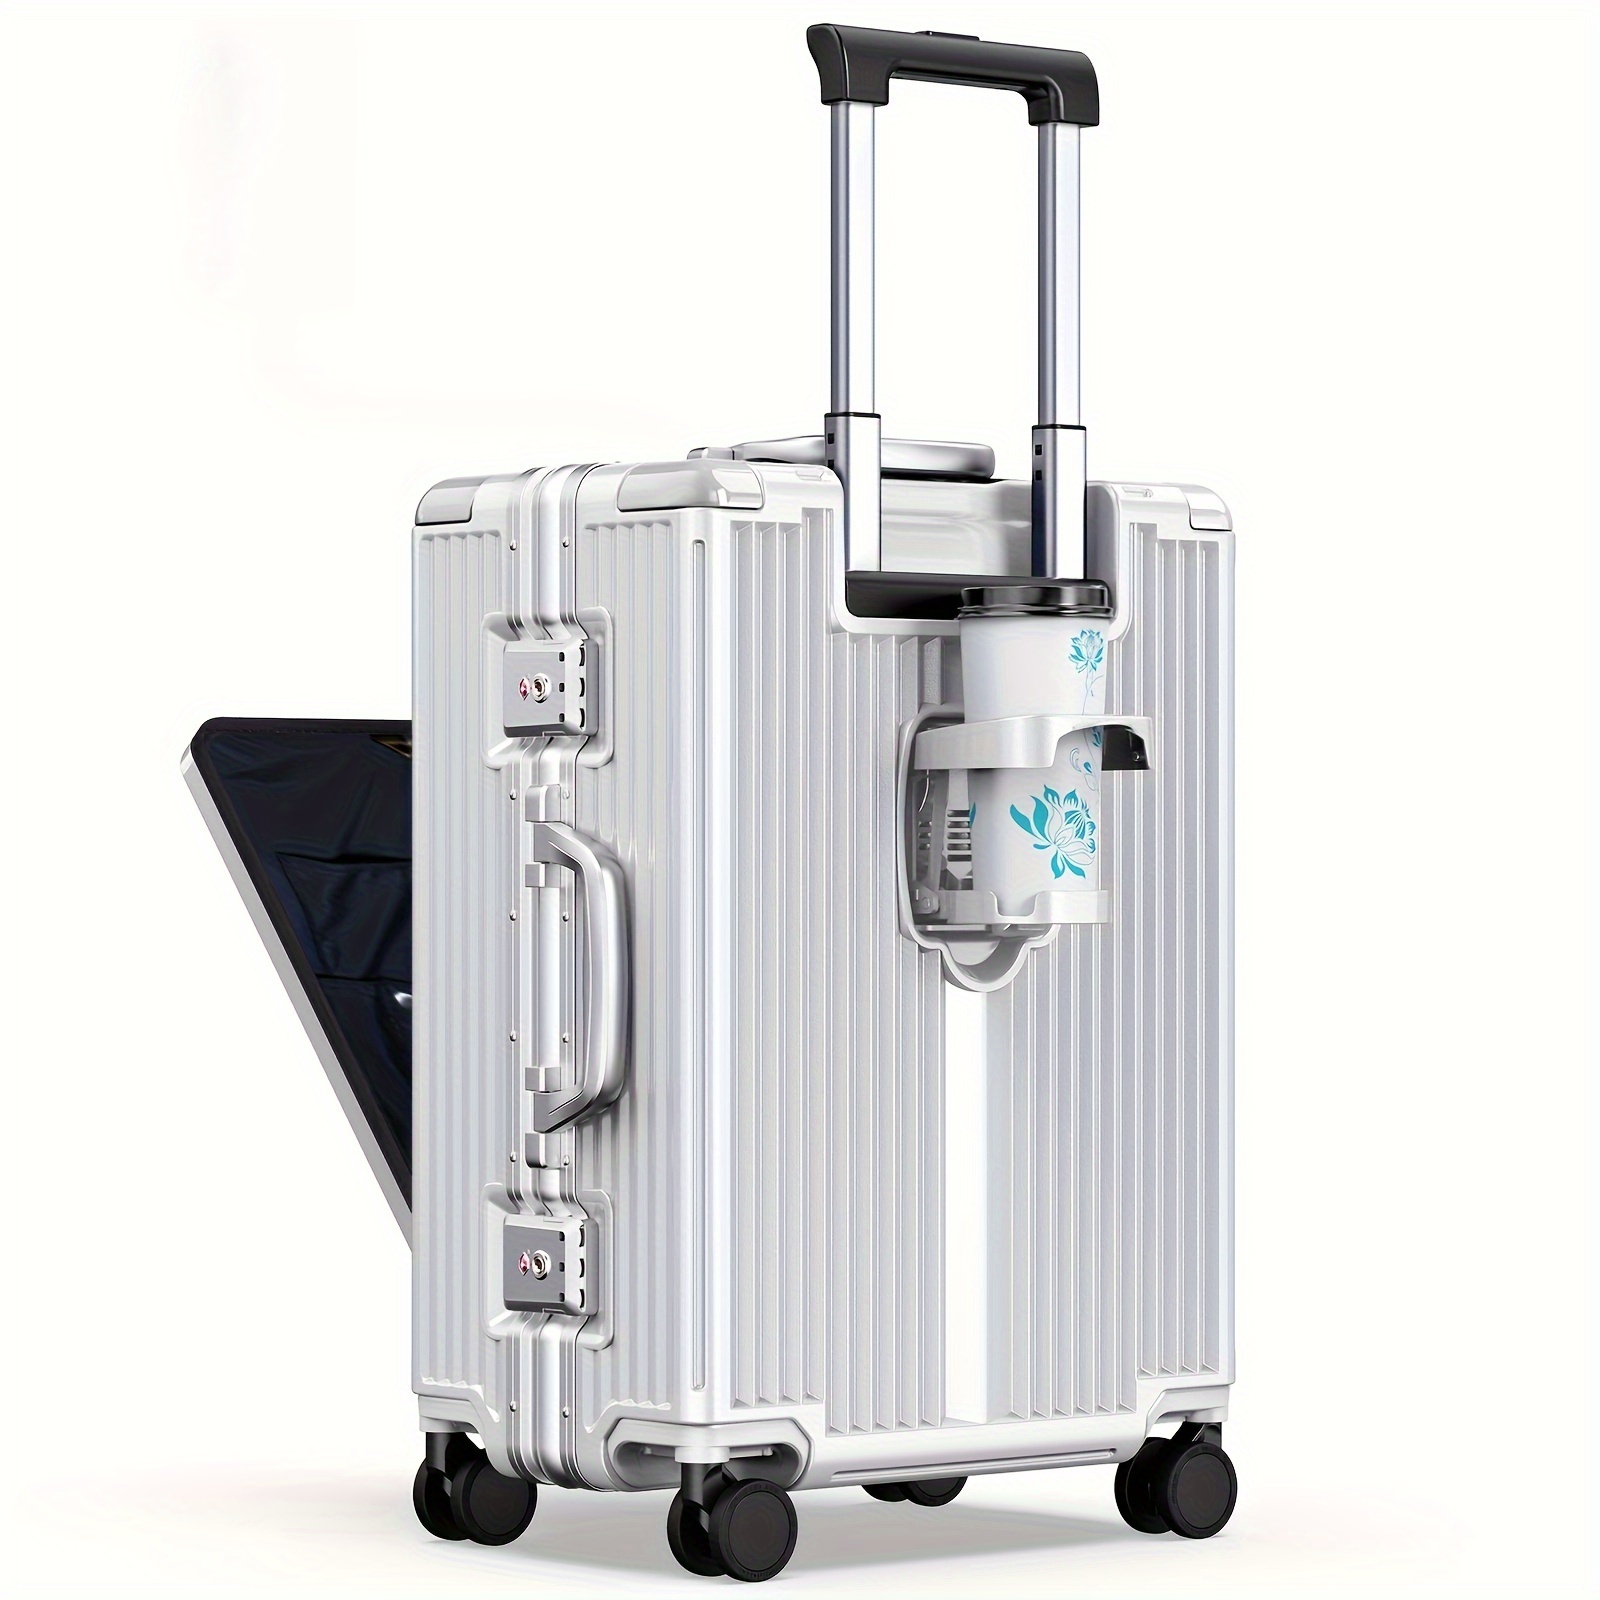 

Portable Carry On Luggage Airline Approved With Cup Holder, Practical Tsa Lock Hardside Luggage With Front Open Laptop Pocket.